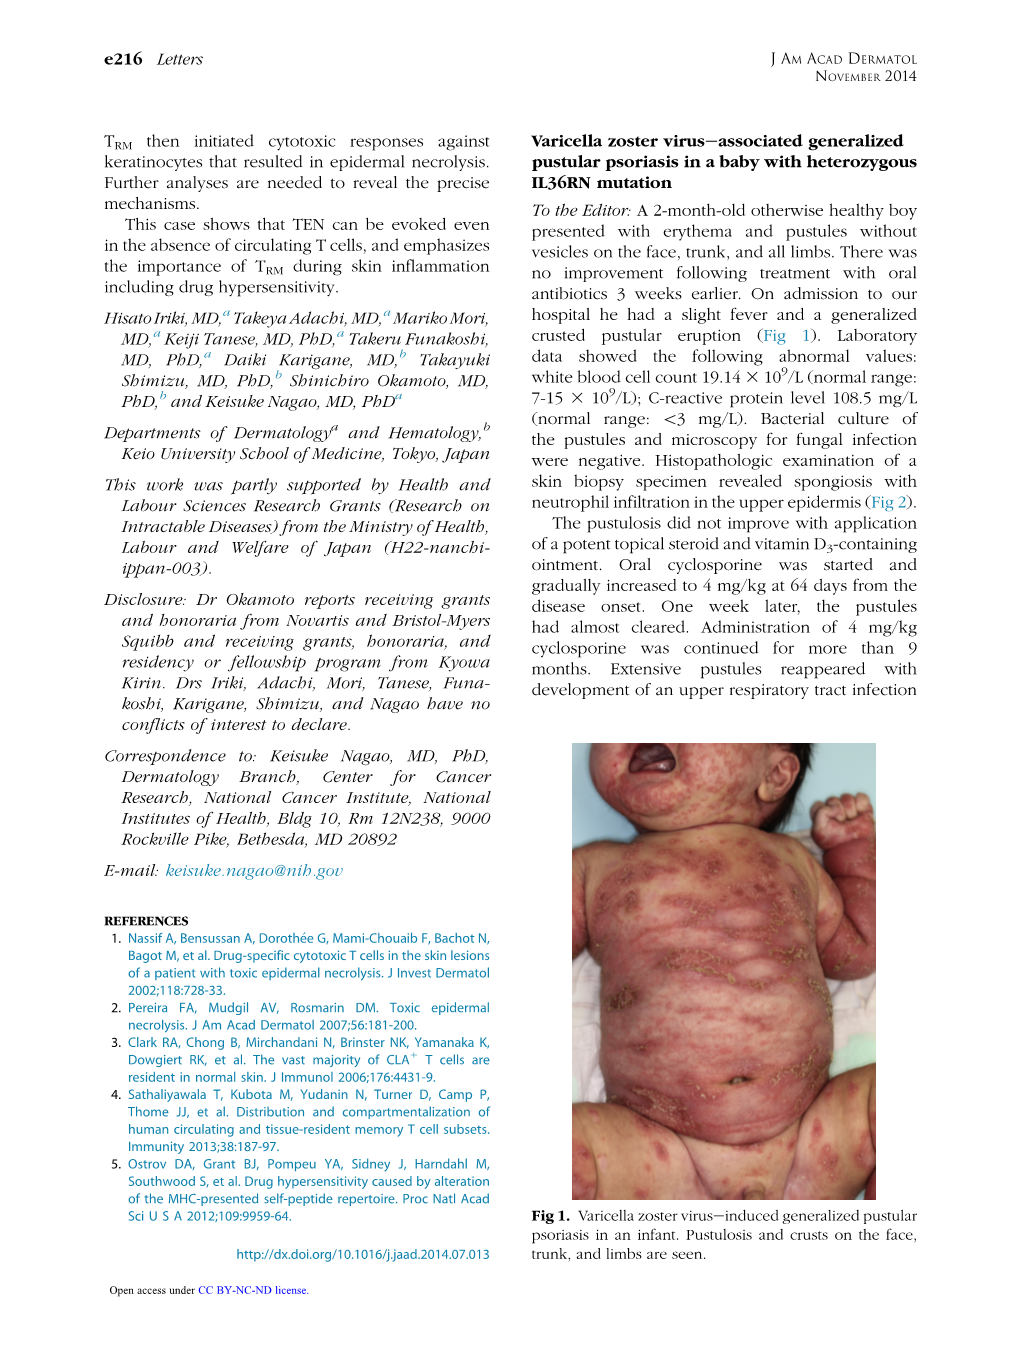 Varicella Zoster Virus-Associated Generalized Pustular Psoriasis in A